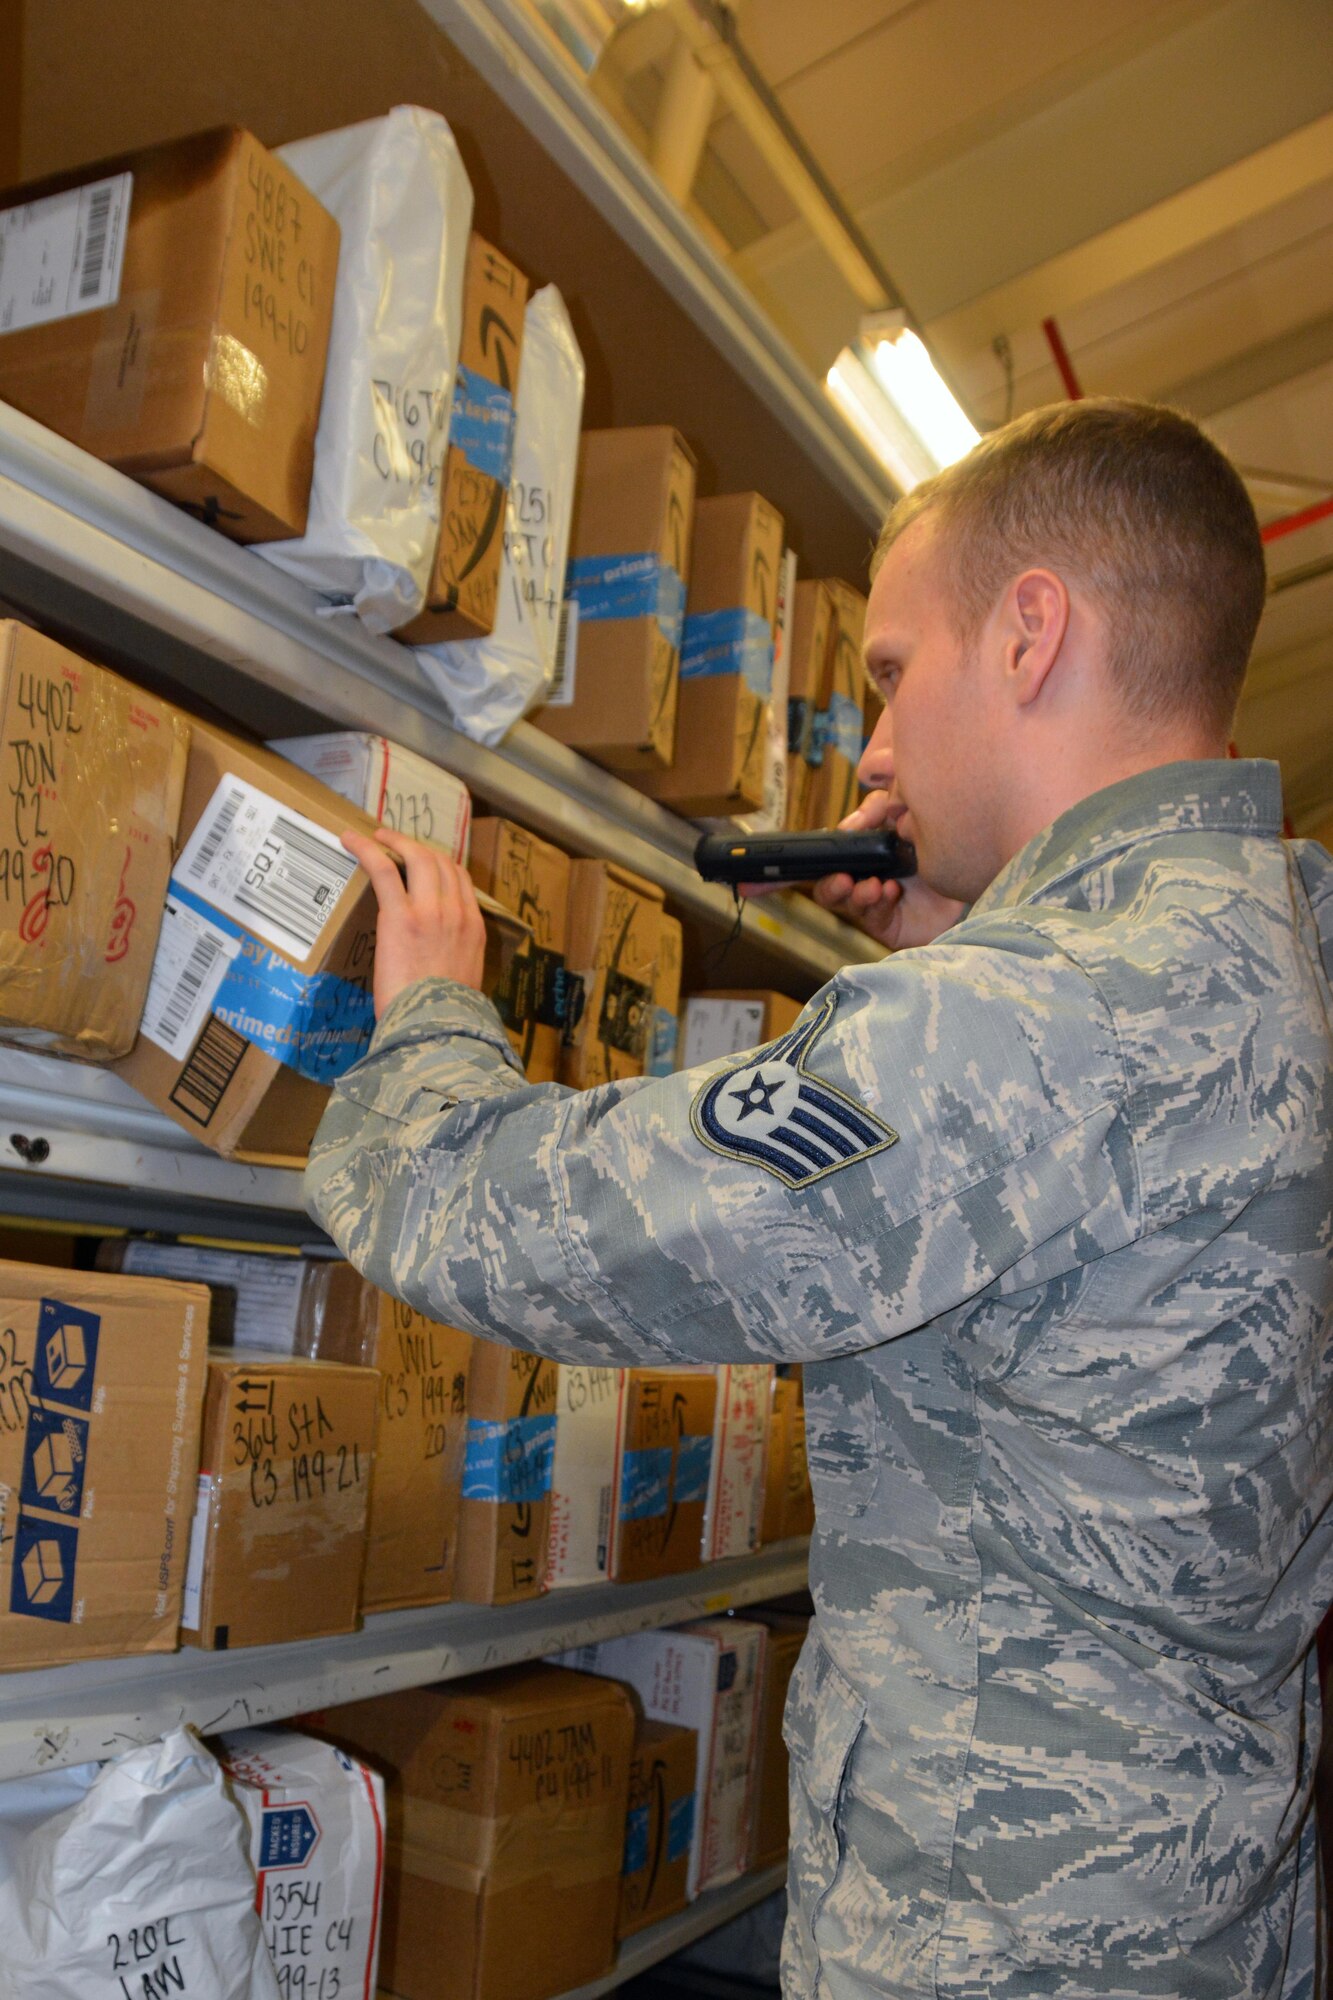 U.S. Air Force Staff Sgt. Douglas Eaton, 100th Communications Squadron Post Office postal clerk, scans a package during training on the new parcel tracking system July 18, 2017, on RAF Mildenhall, England. The new system, scheduled to take effect Aug. 14, will allow email notifications to be sent to customers when their packages have arrived at the post office. (U.S. Air Force photo by Tech. Sgt. Lauren Gleason)